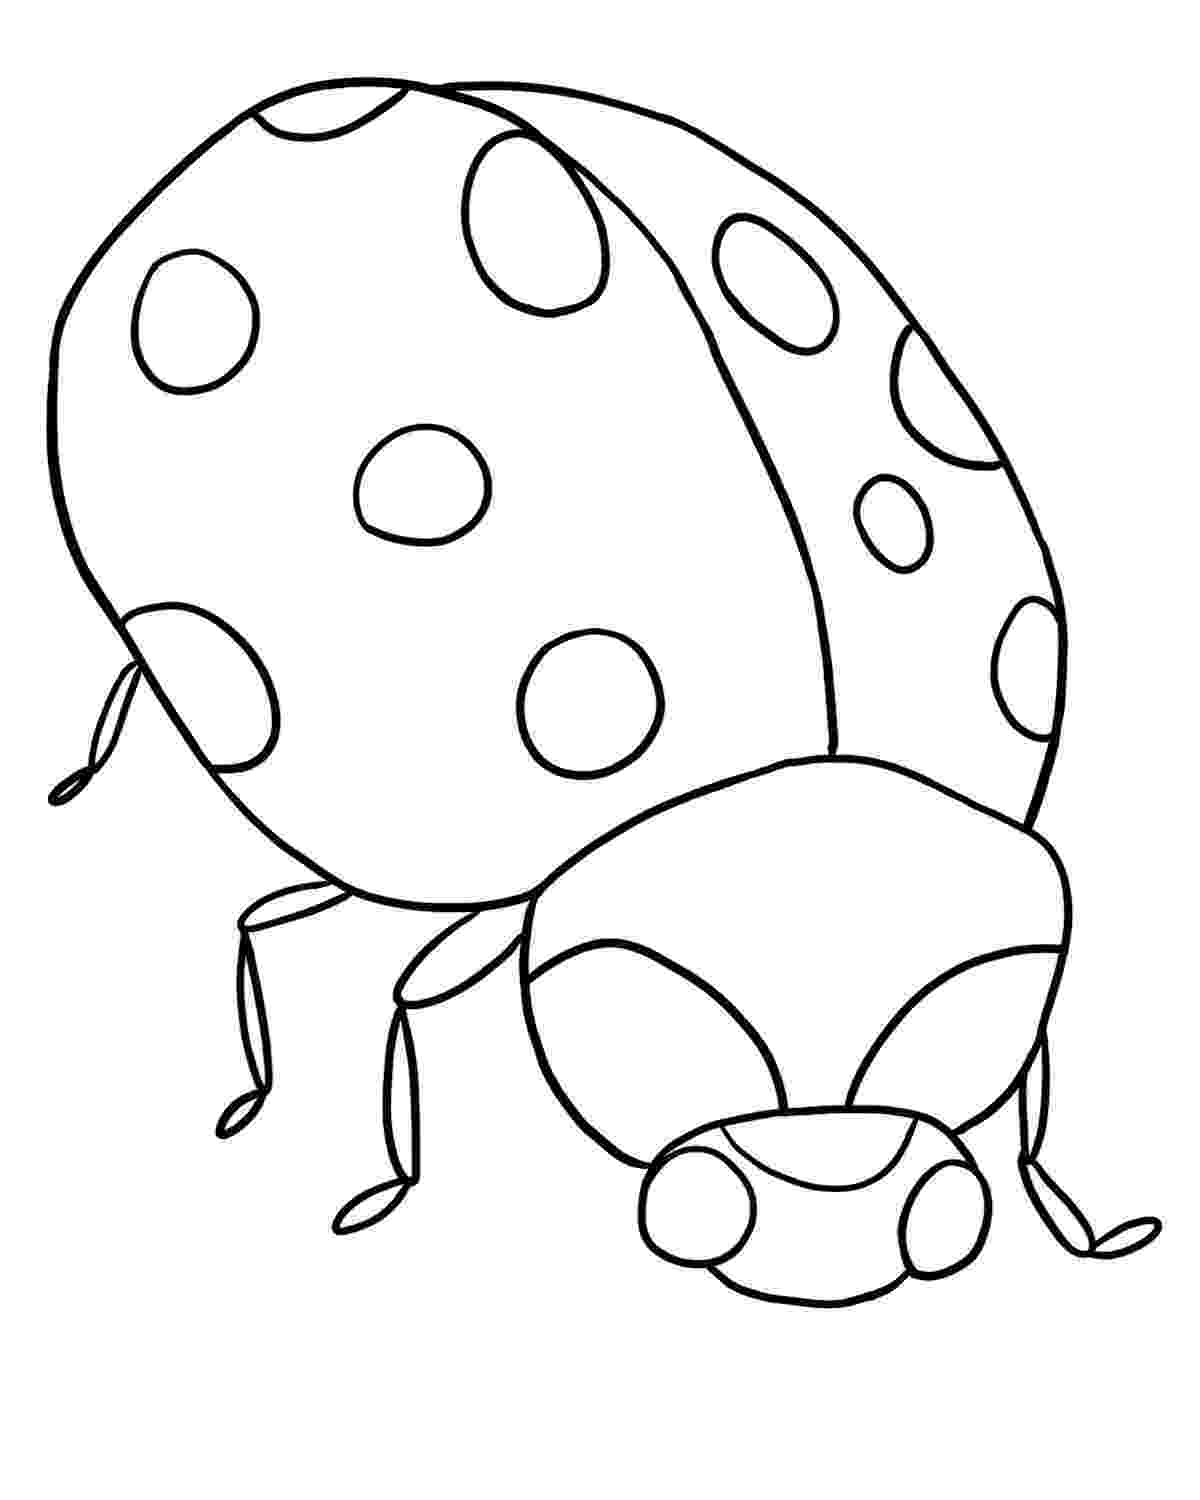 lady bug coloring pages ladybug coloring pages getcoloringpagescom lady pages coloring bug 